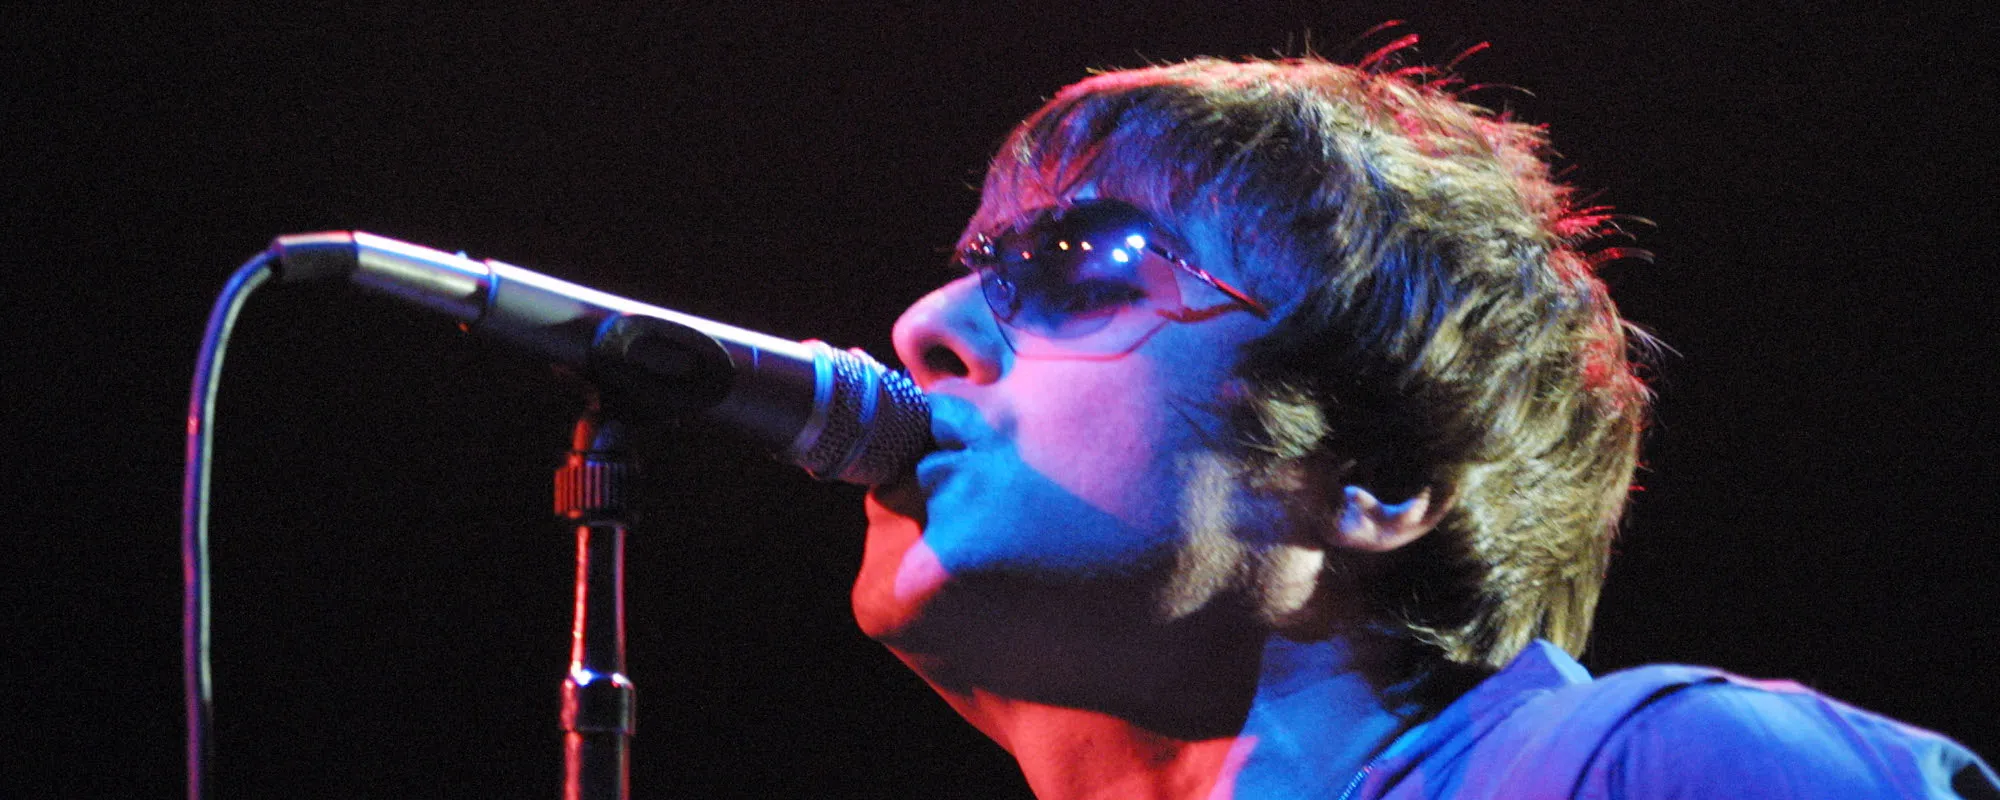 The Meaning Behind “Champagne Supernova” by Oasis and Why Its Emotional Impact Still Resonates with Fans